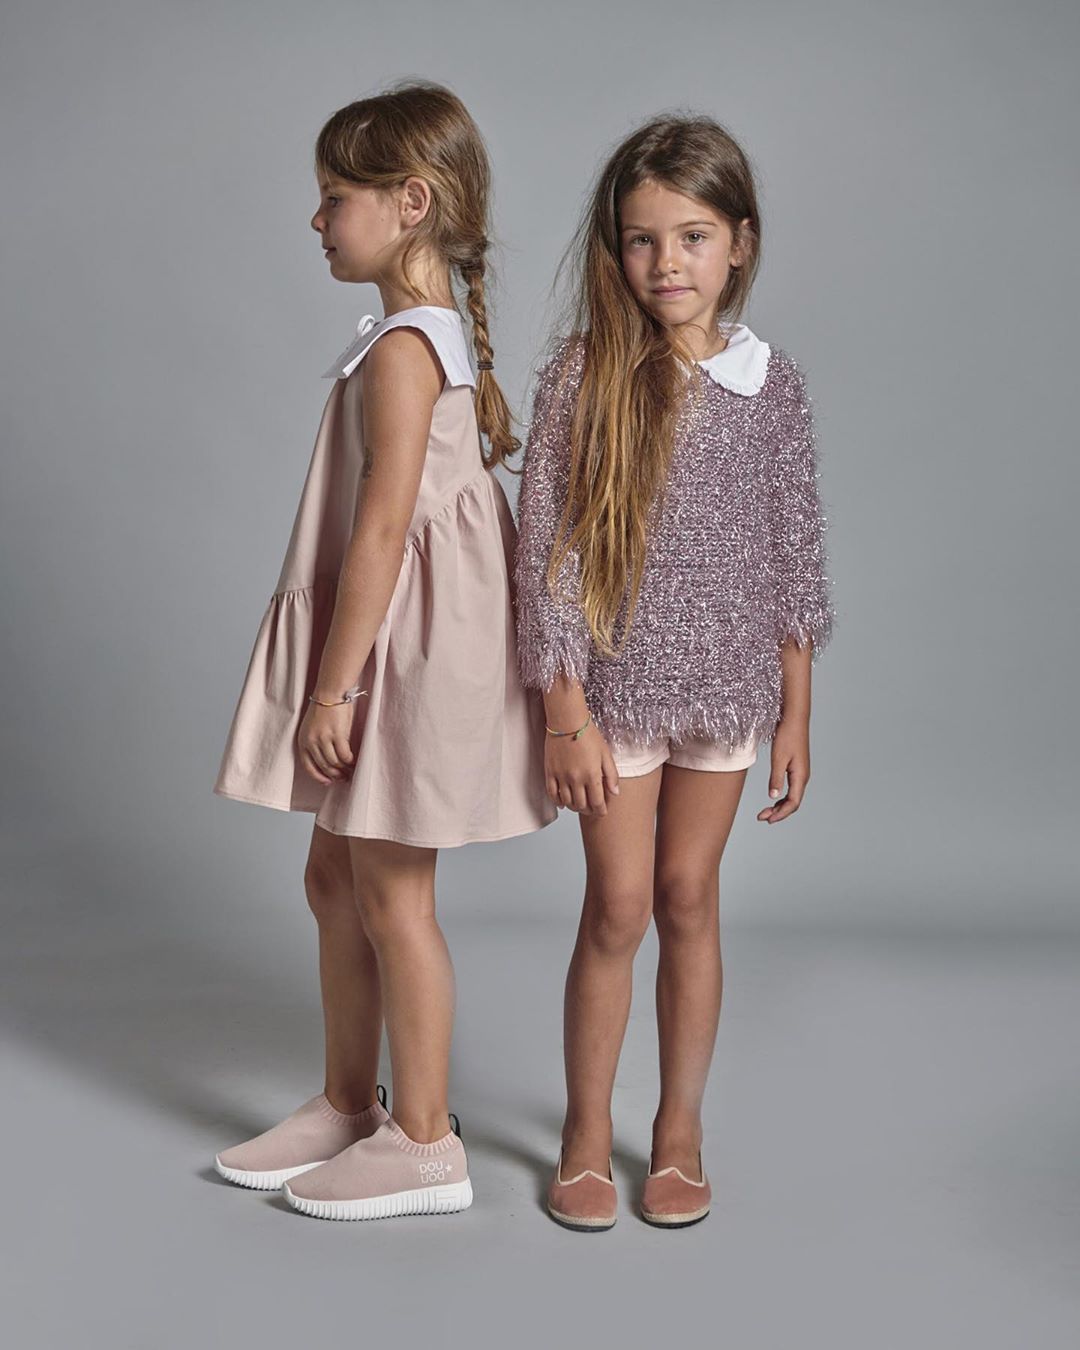 DOUUOD KIDS SS 2020 collection…